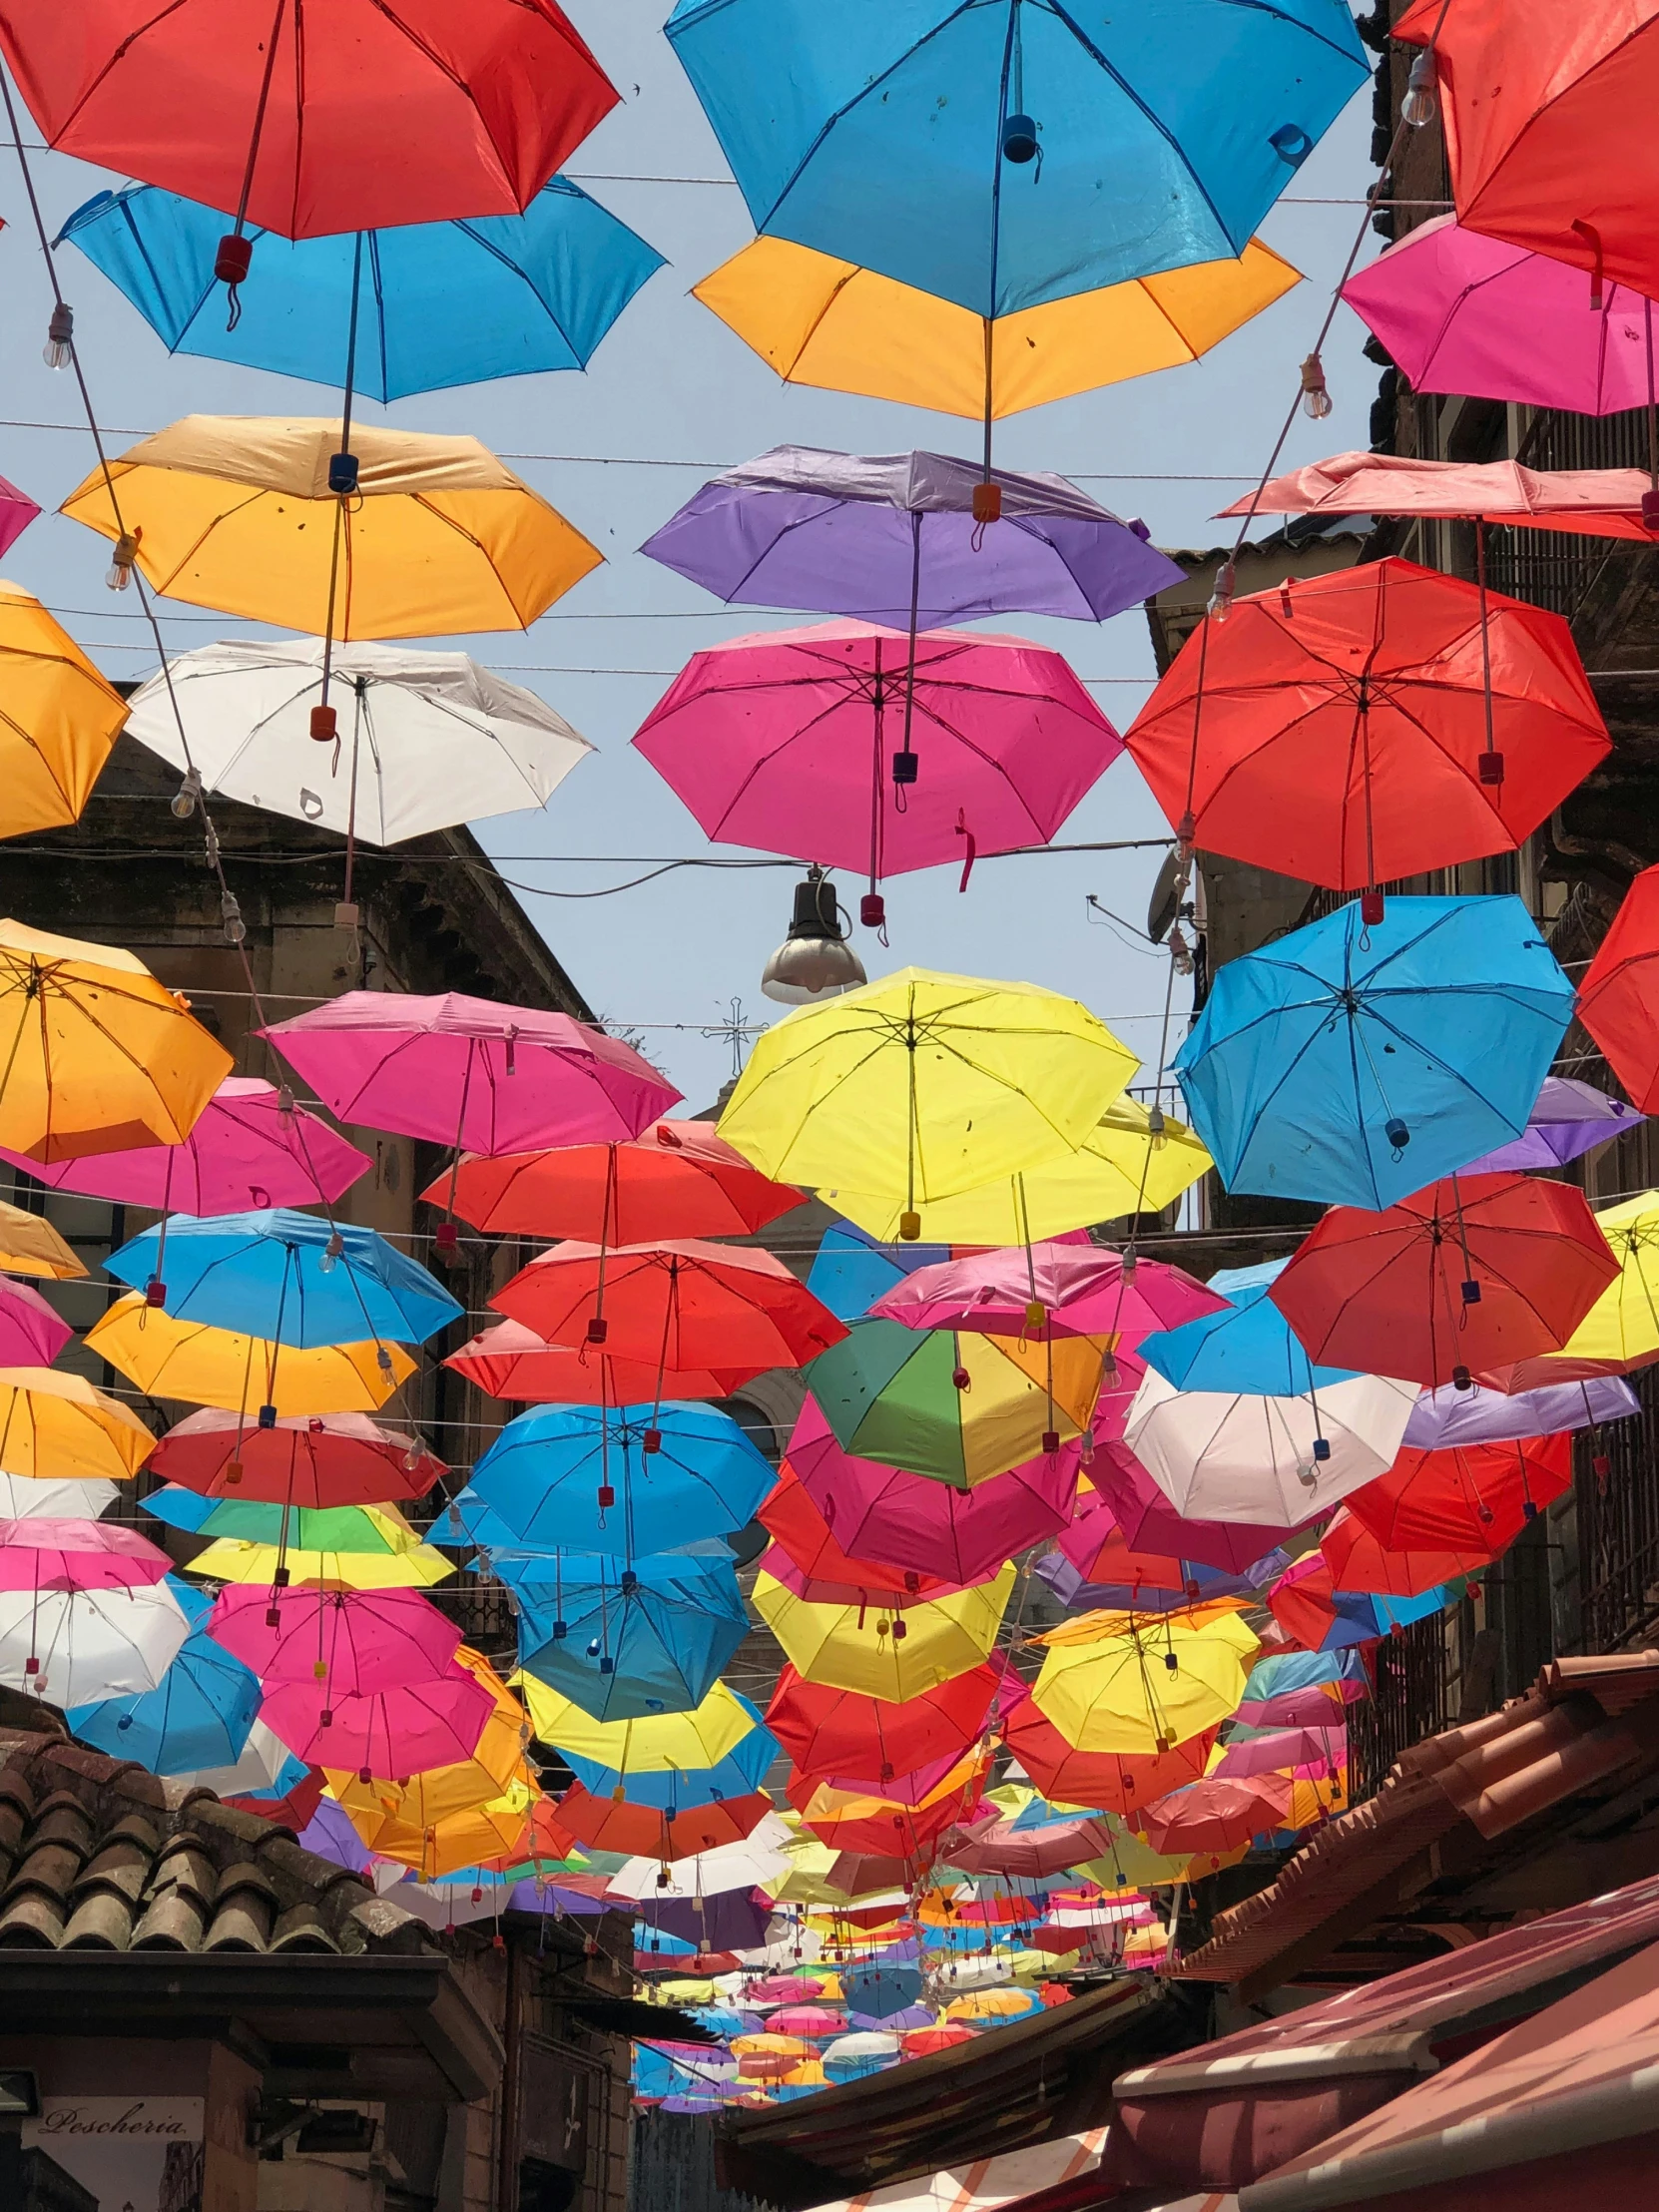 there are many colorful umbrellas flying above the streets